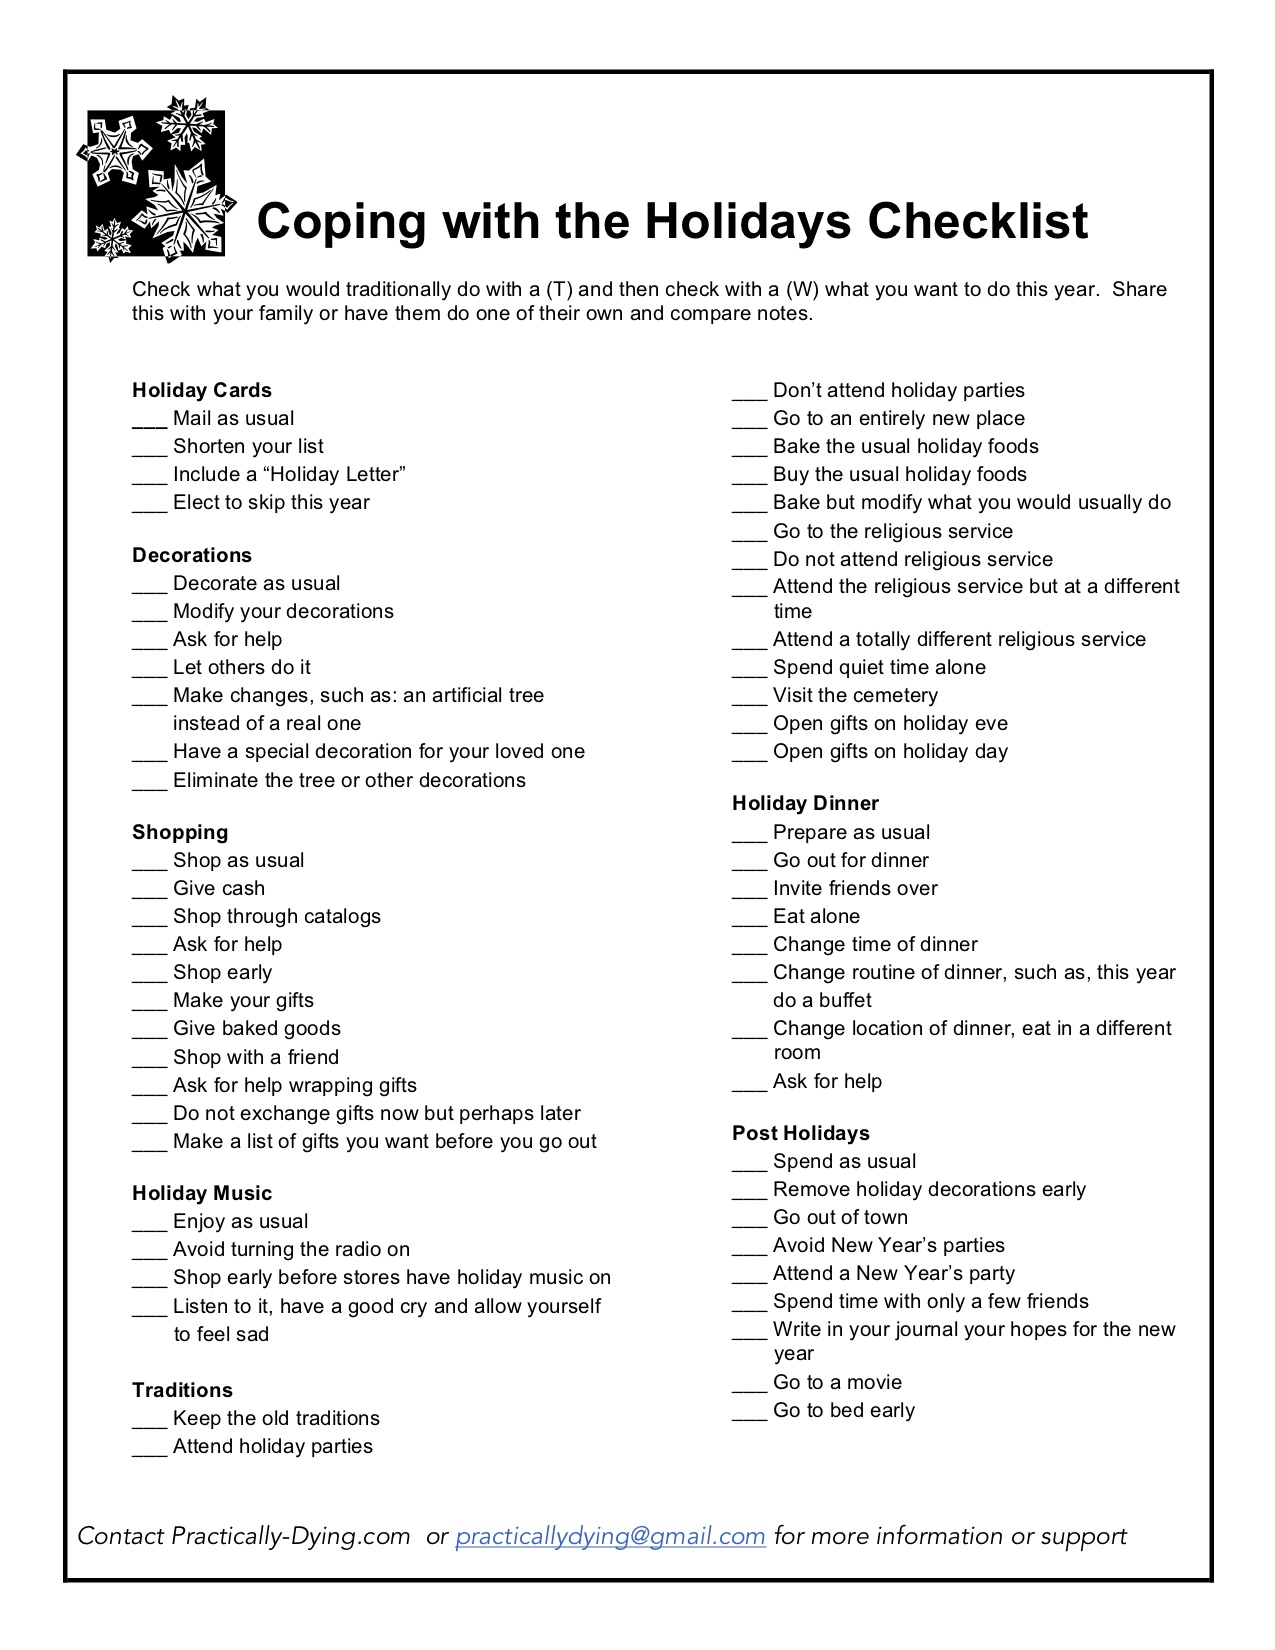 Coping with the Hoidays Checklist: Practically Dying